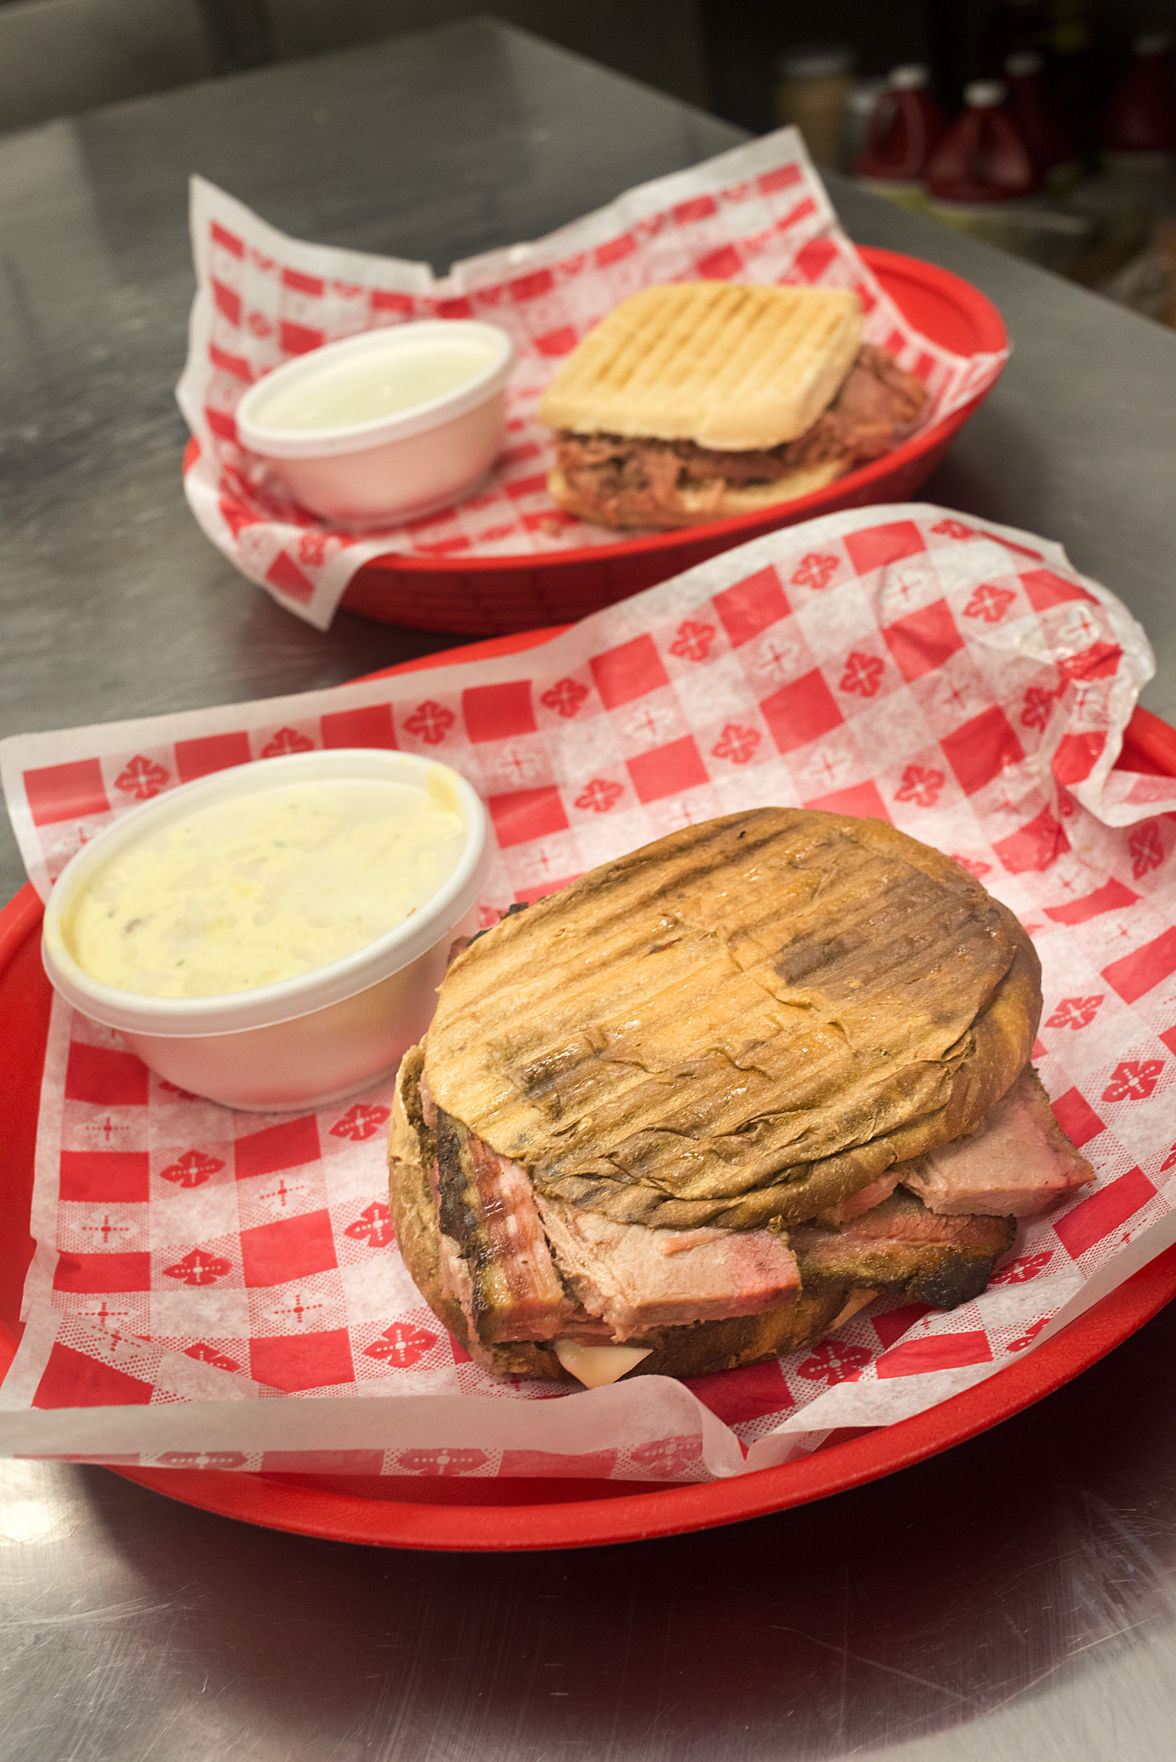 Siouxland S Sumptuous Sandwiches Sns q S Smoky Take On The Classic Reuben Weekender Food Siouxcityjournal Com